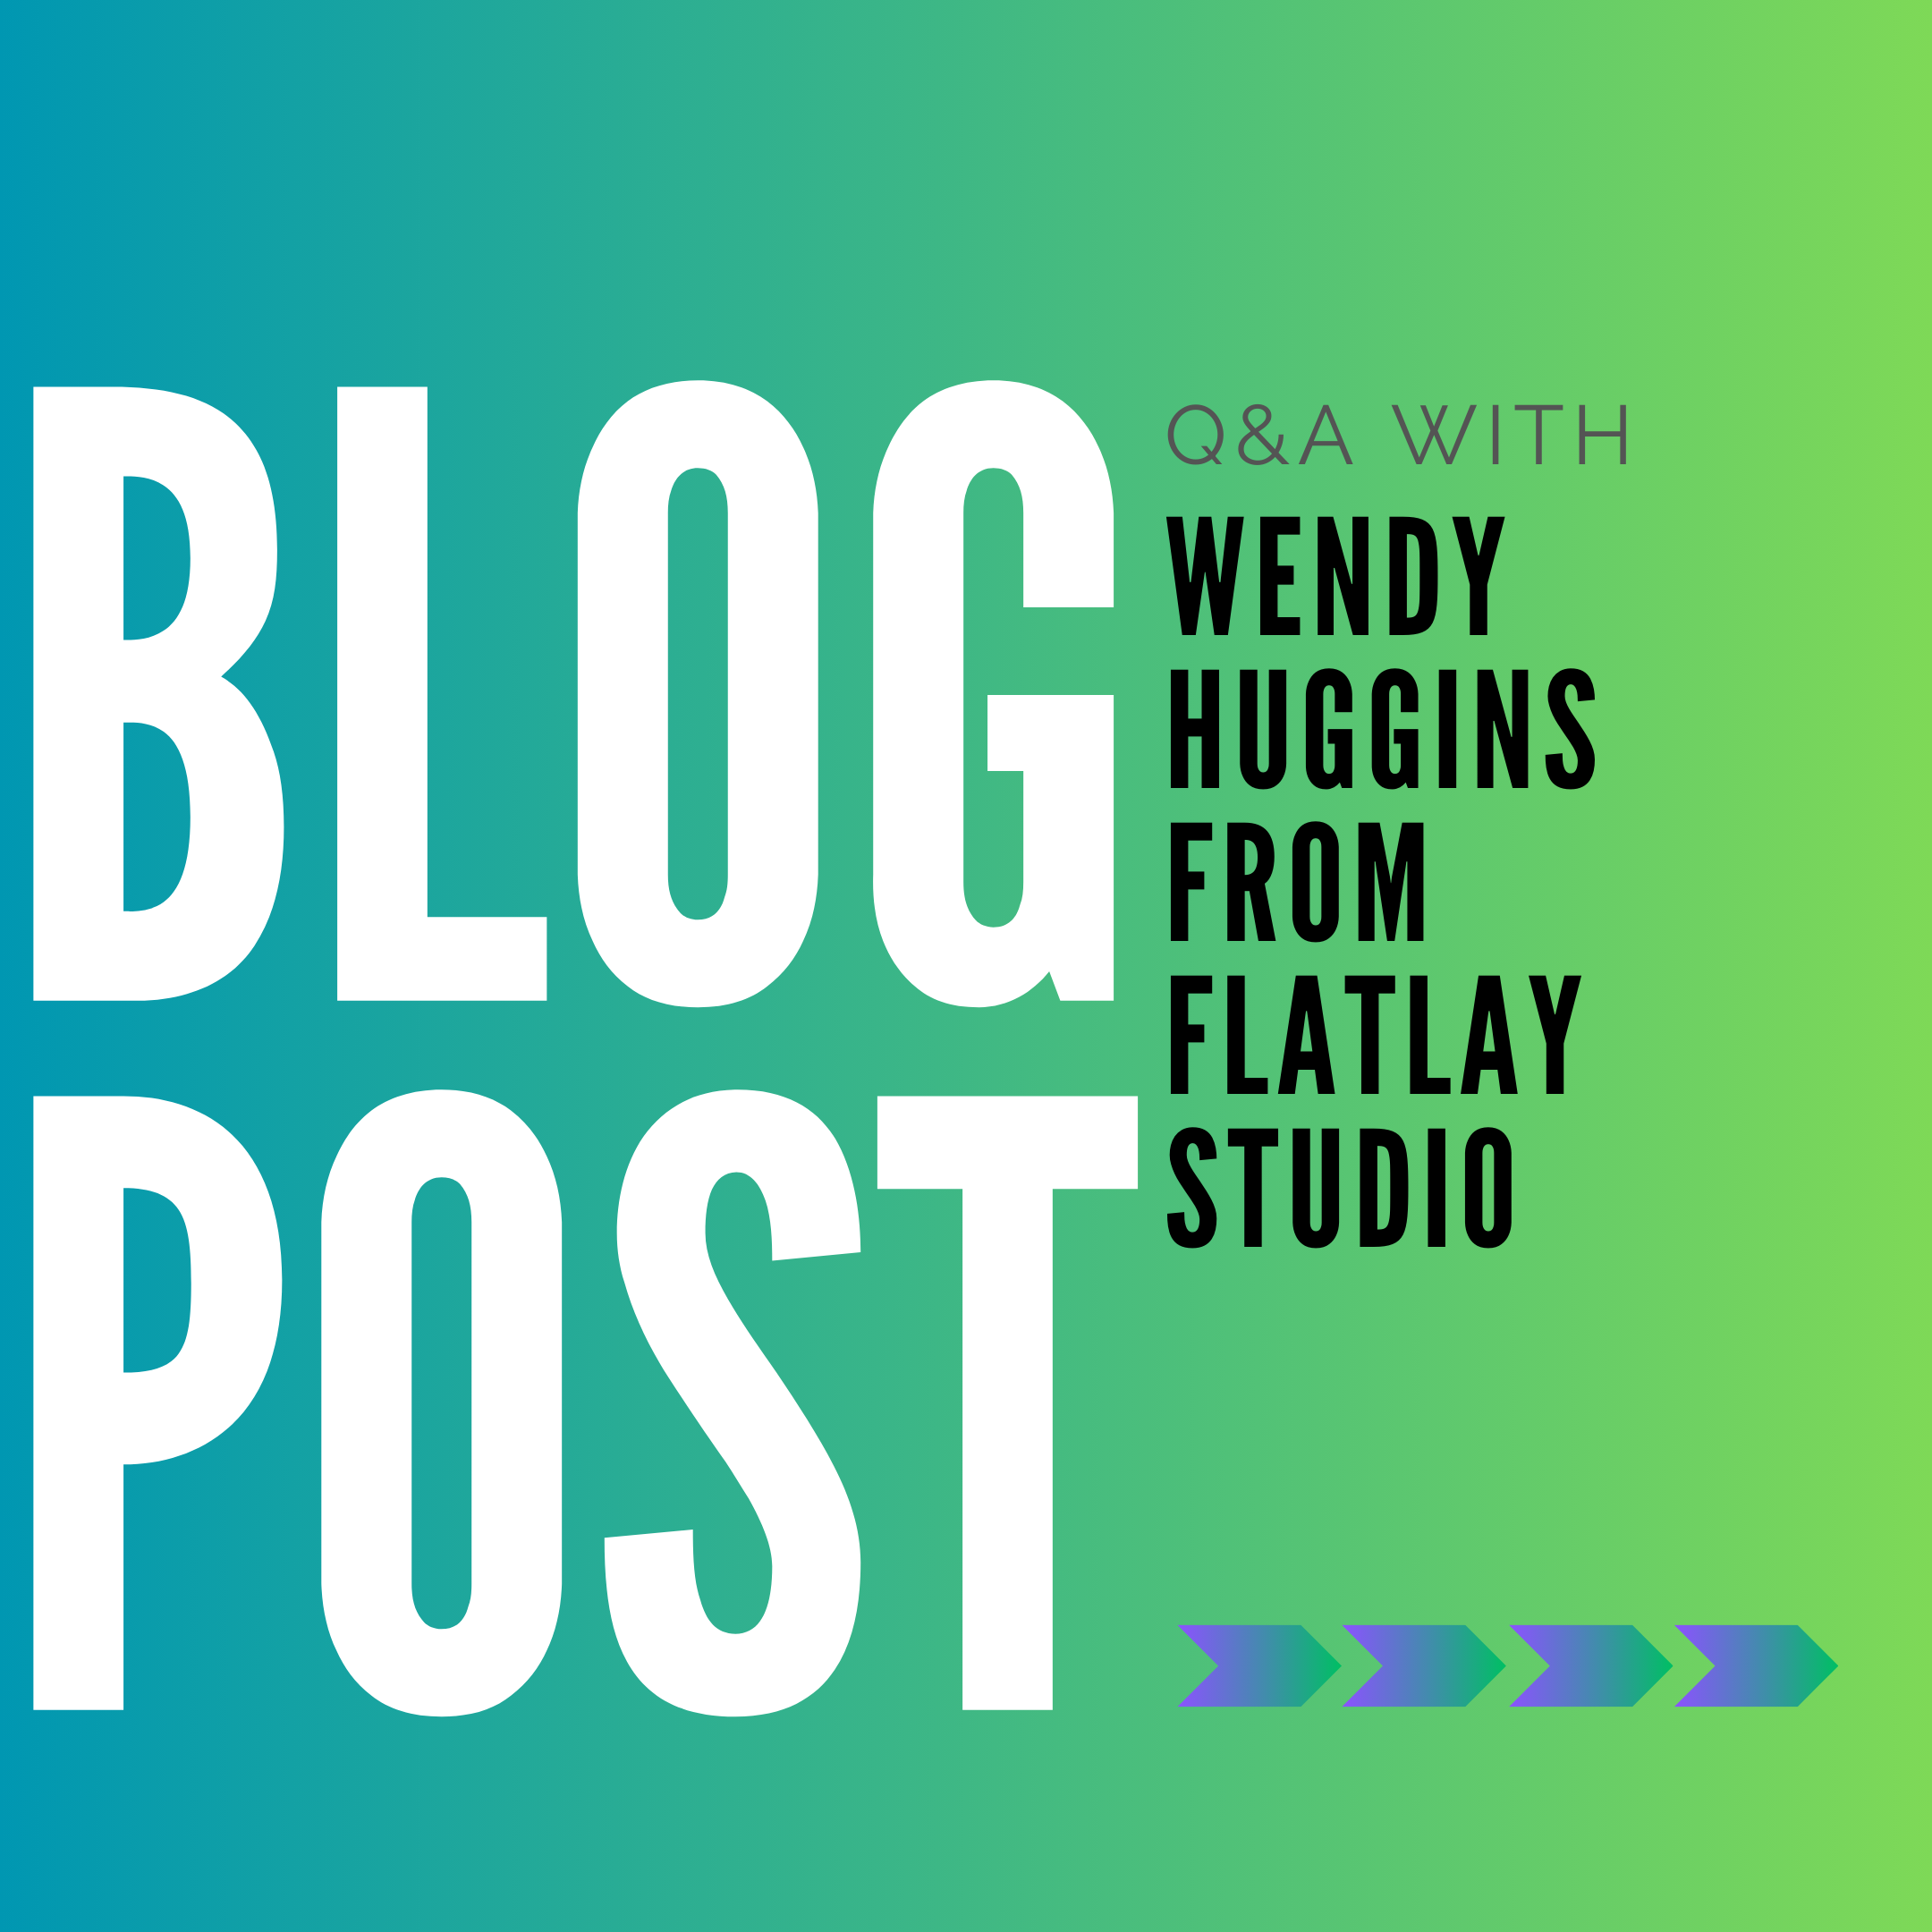 Q&A With Wendy Huggins Founder & Owner of Flatlay Studio